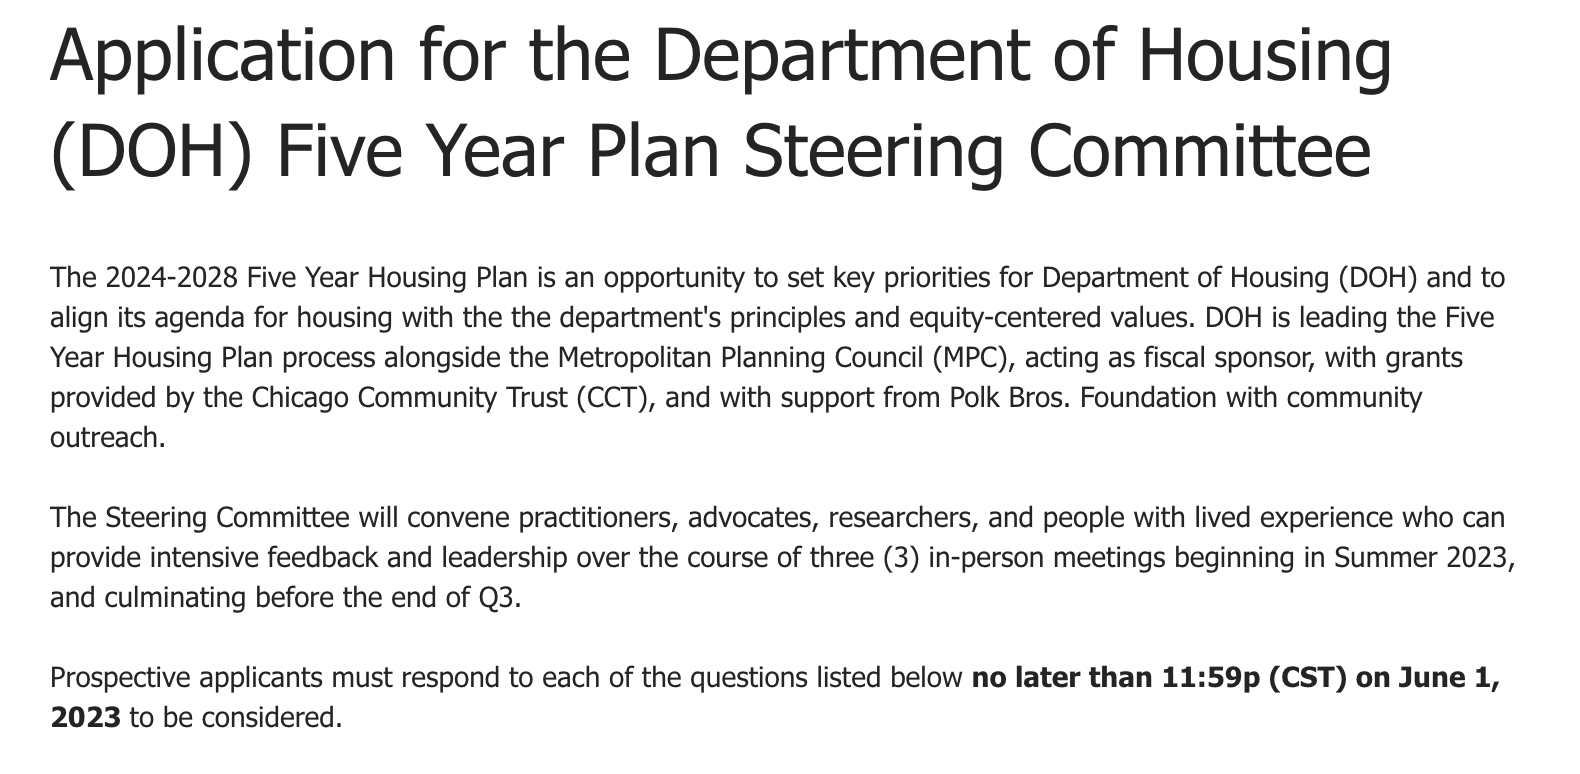 Apply to be on the Steering Committee for the Department of Housing’s next Five Year Plan